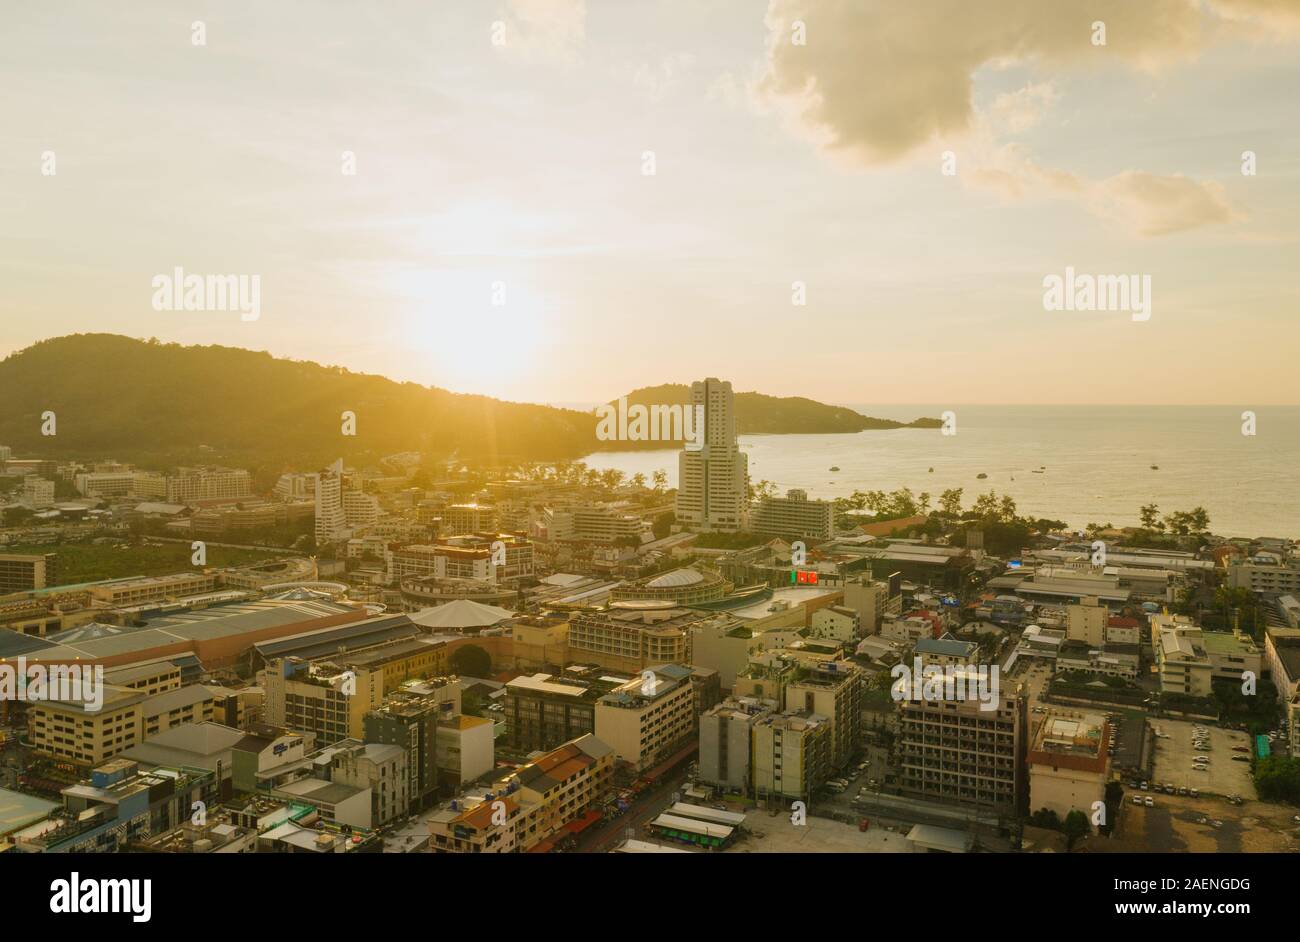 Sunset on Patong Beach and city life in Thailand Phuket Island Drone flight Stock Photo